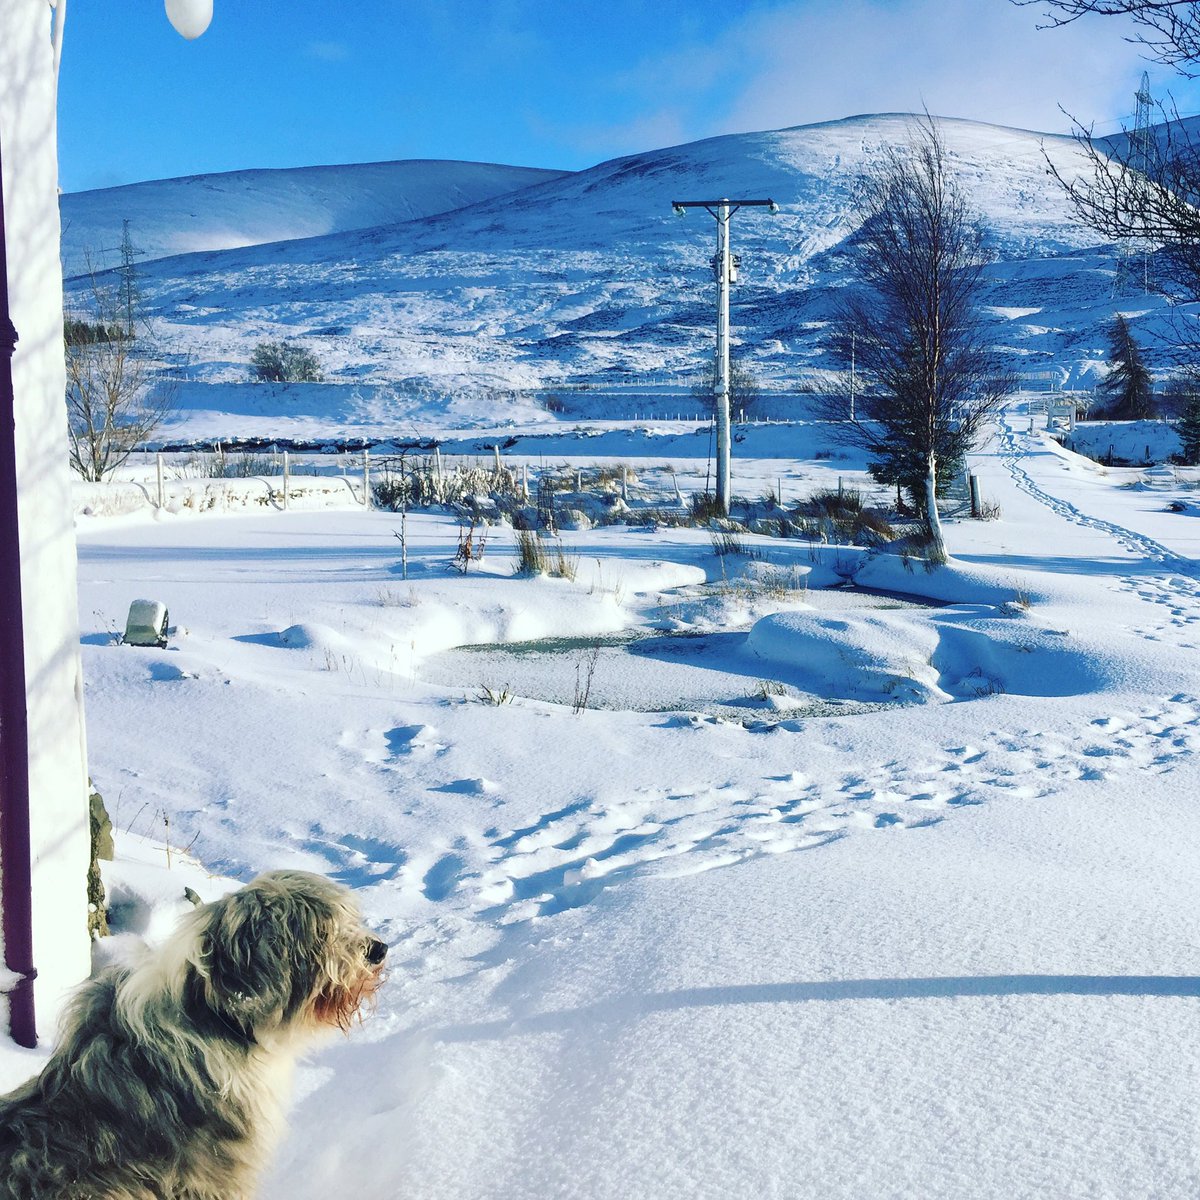 Breakfast with a view #snow #visitscotland #january #munrowalking #bedandbreakfast #openingsoon  #cairngorms #highlands #dalwhinnie #scenic